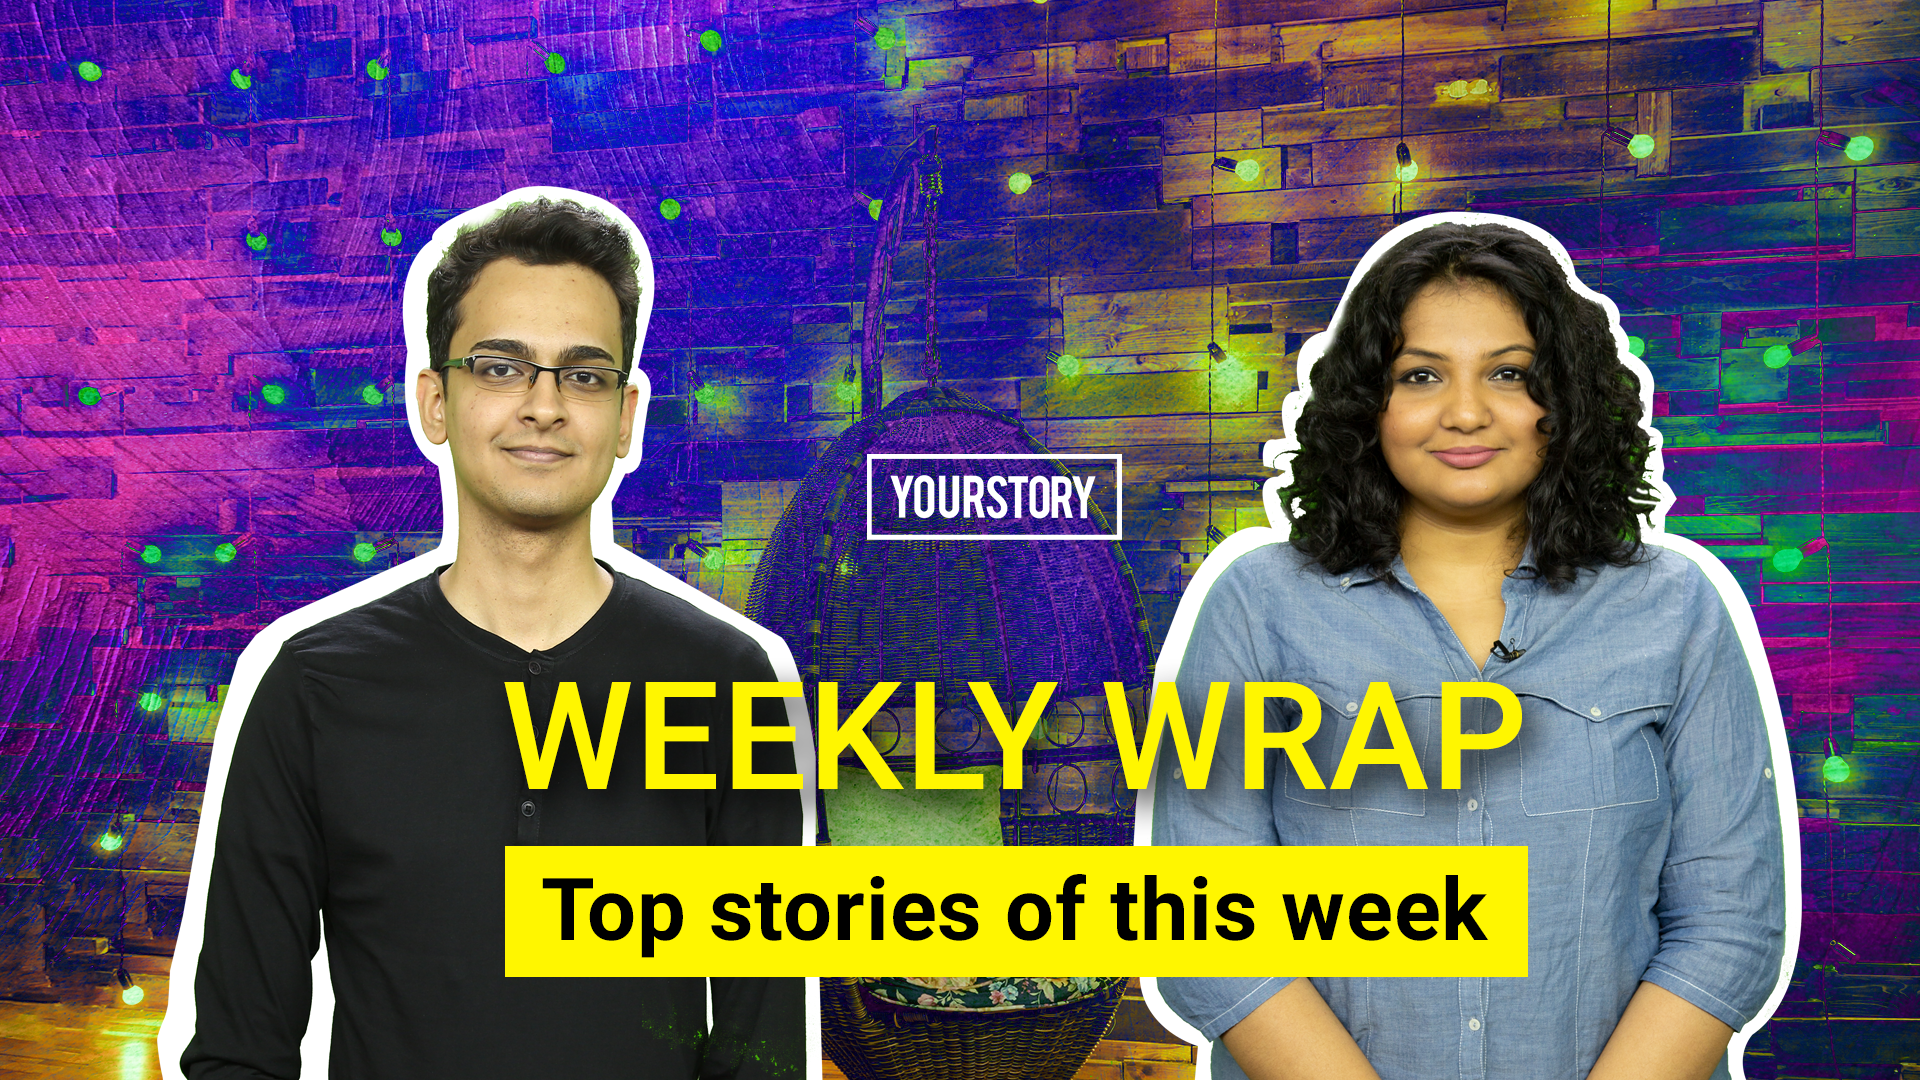 WATCH: The week that was - from India's app revolution to an exclusive with Nandan Nilekani